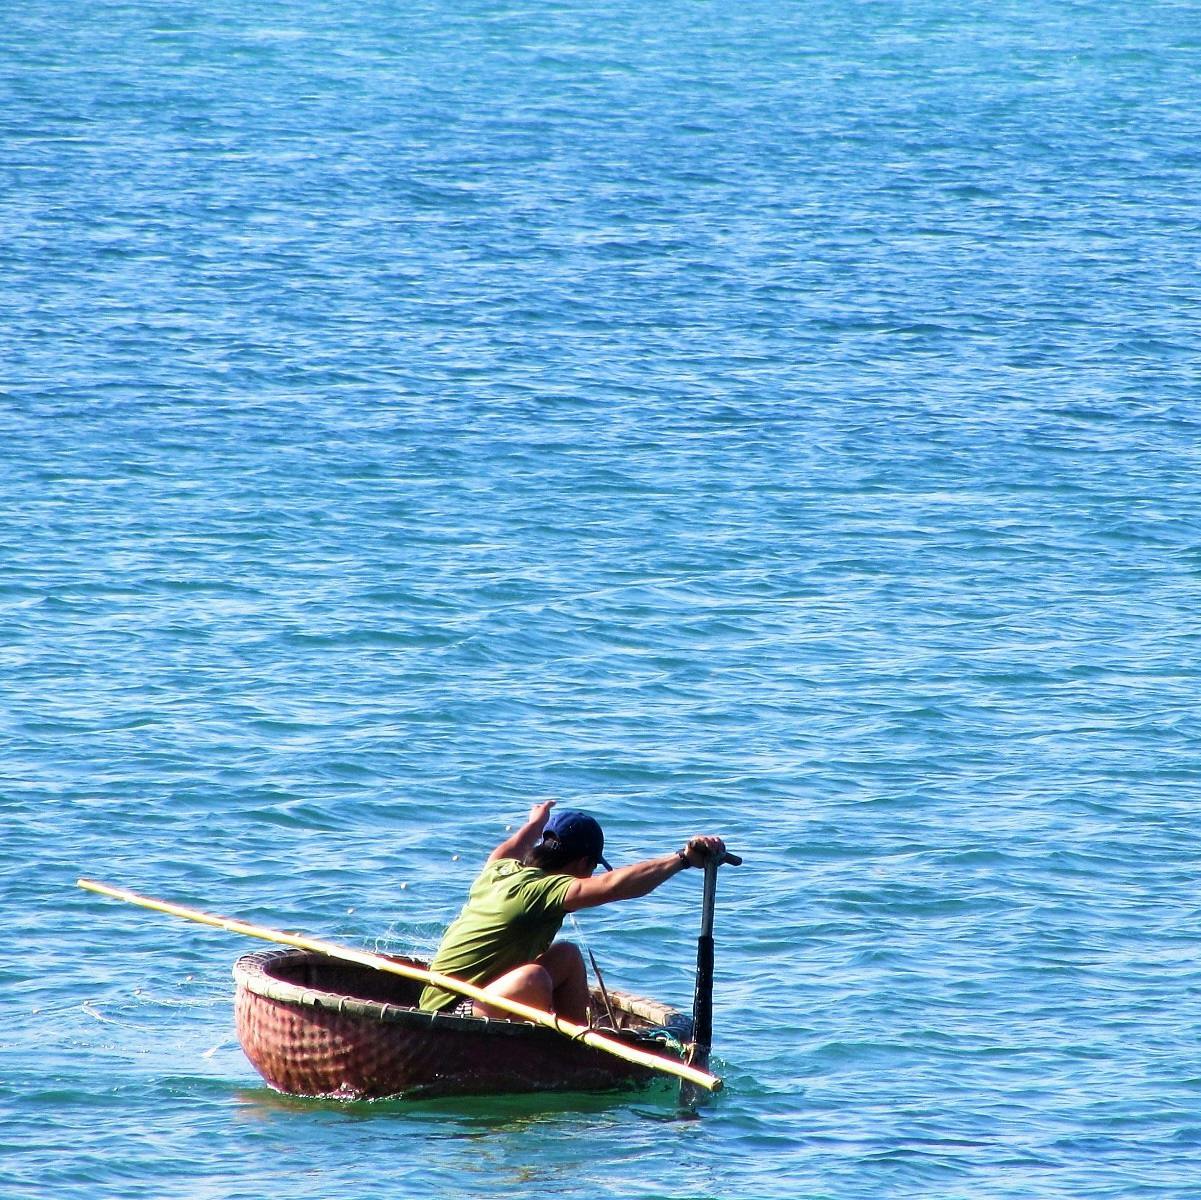 Ode to the Ocean: A Personal Meditation on the Sea in Vietnam